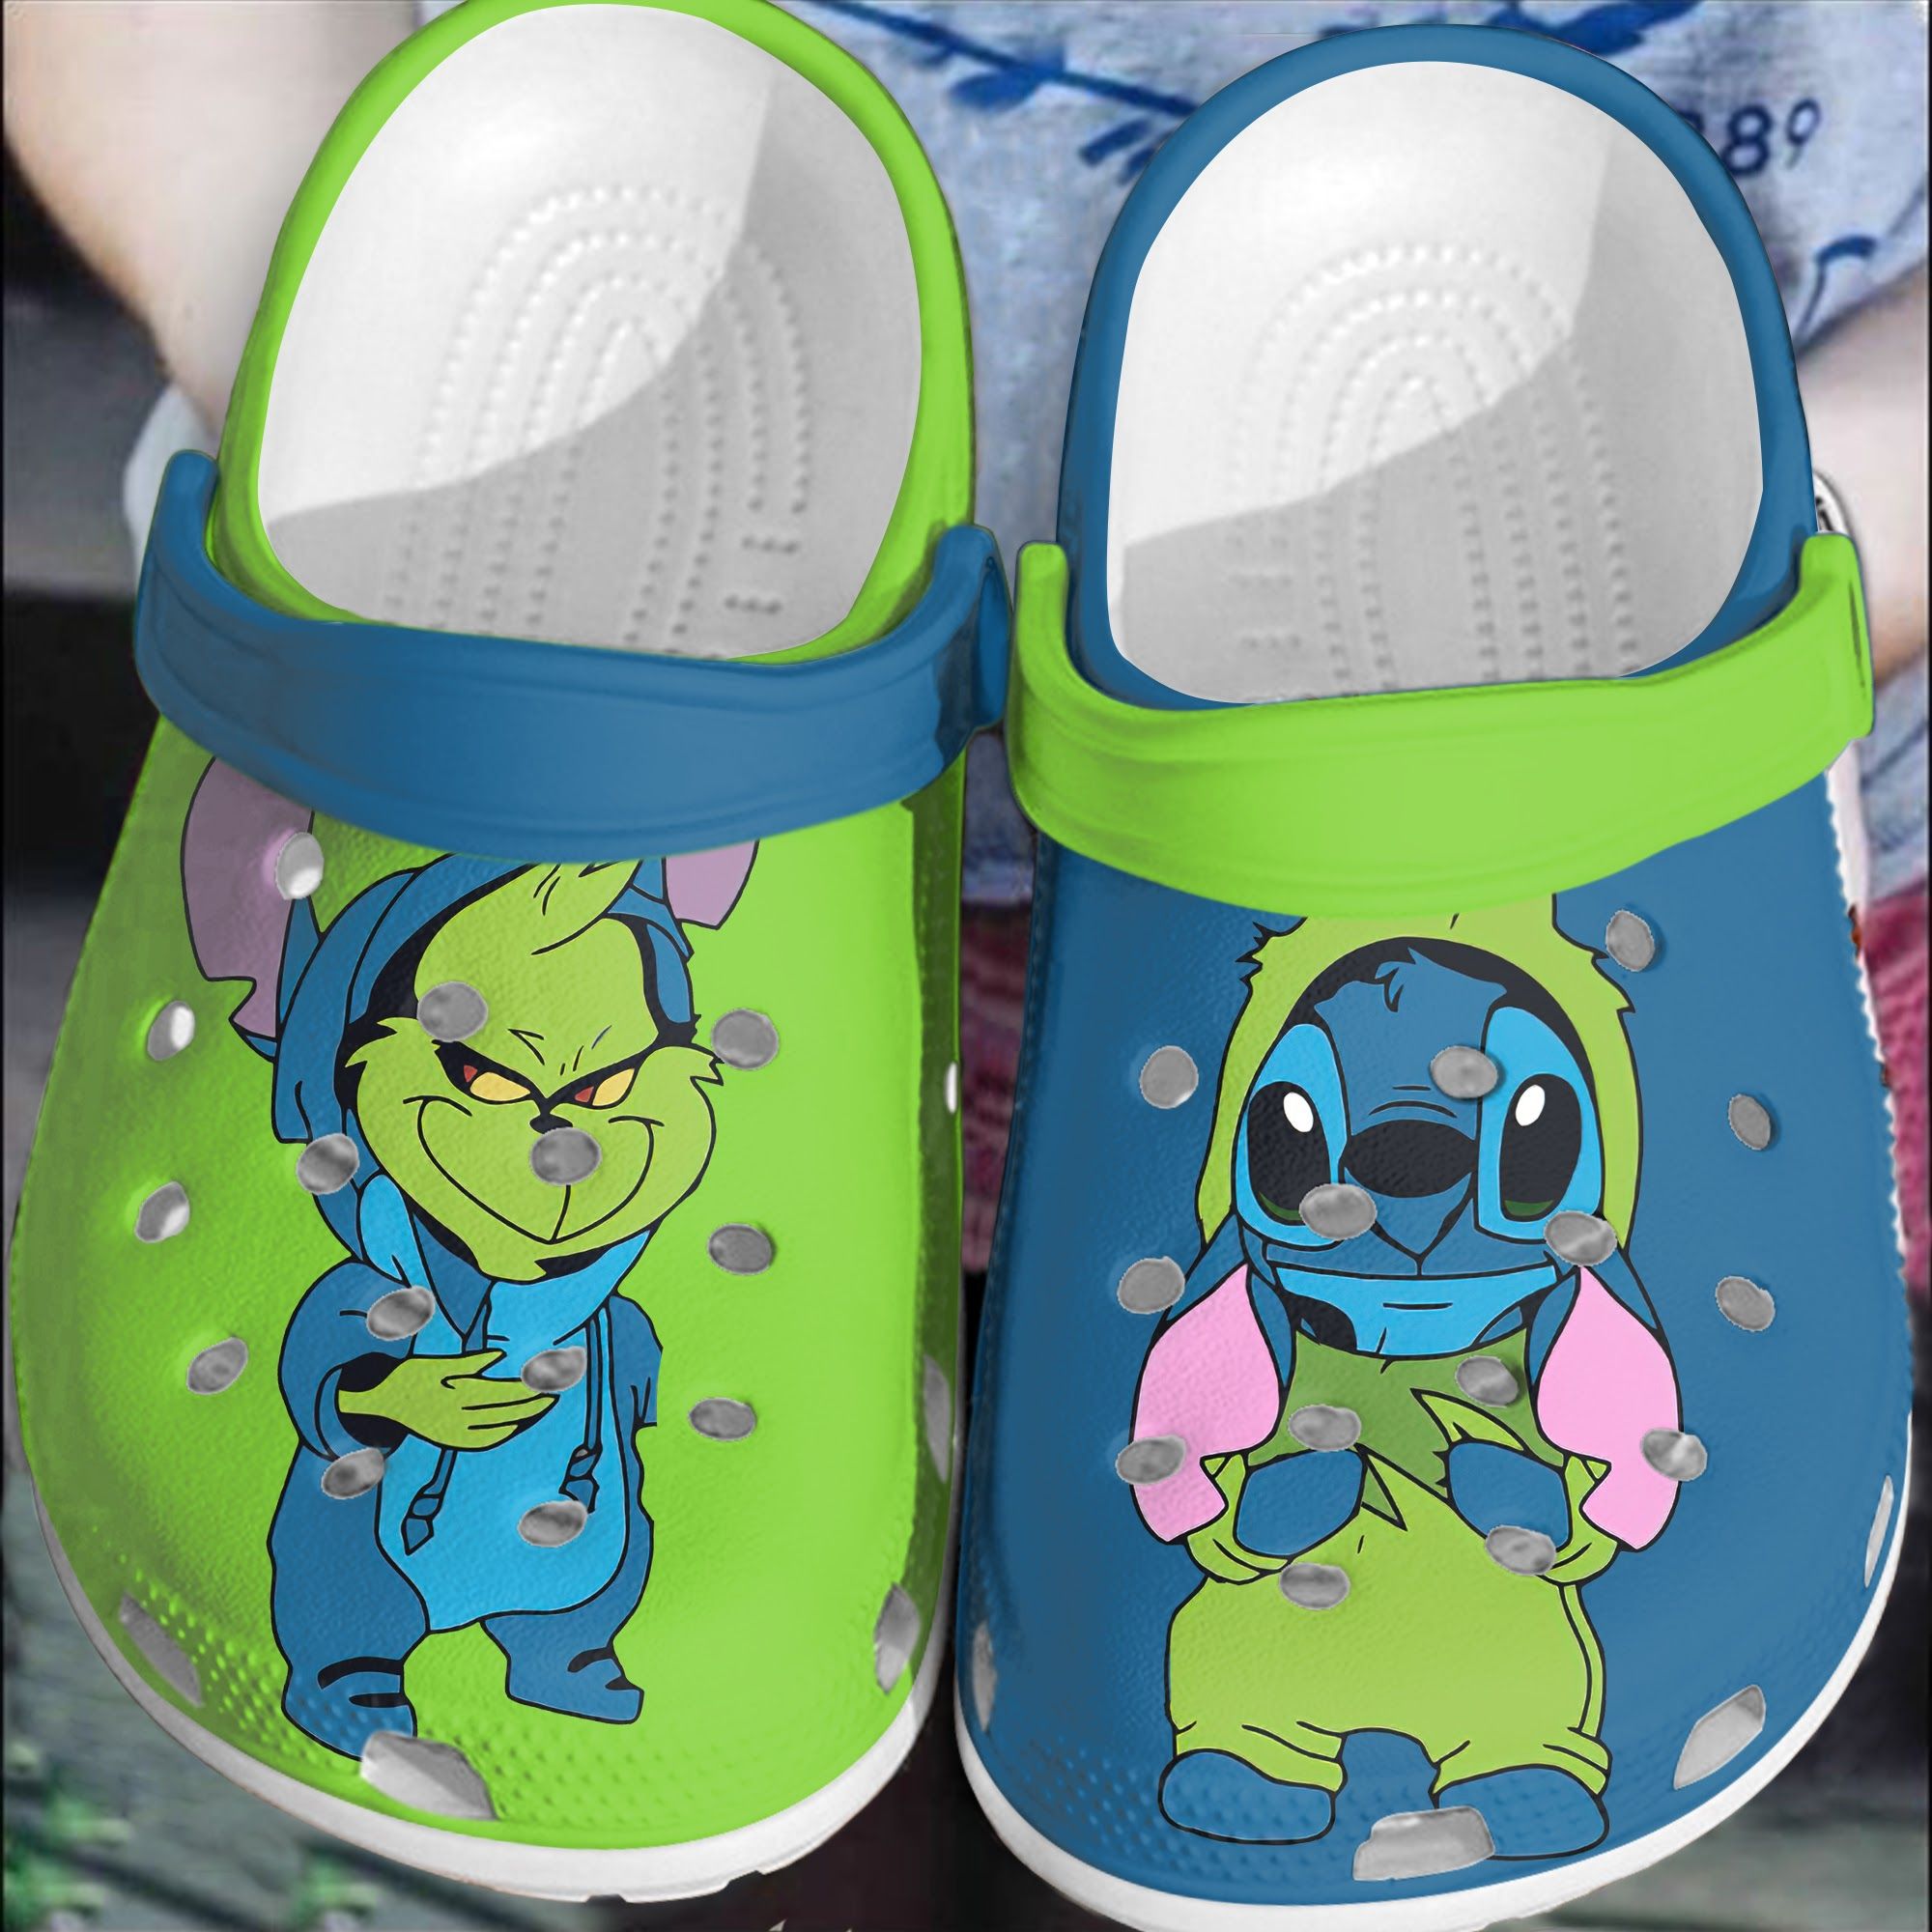 Find yourself a super cute Crocs shoe or give it as a gift 175